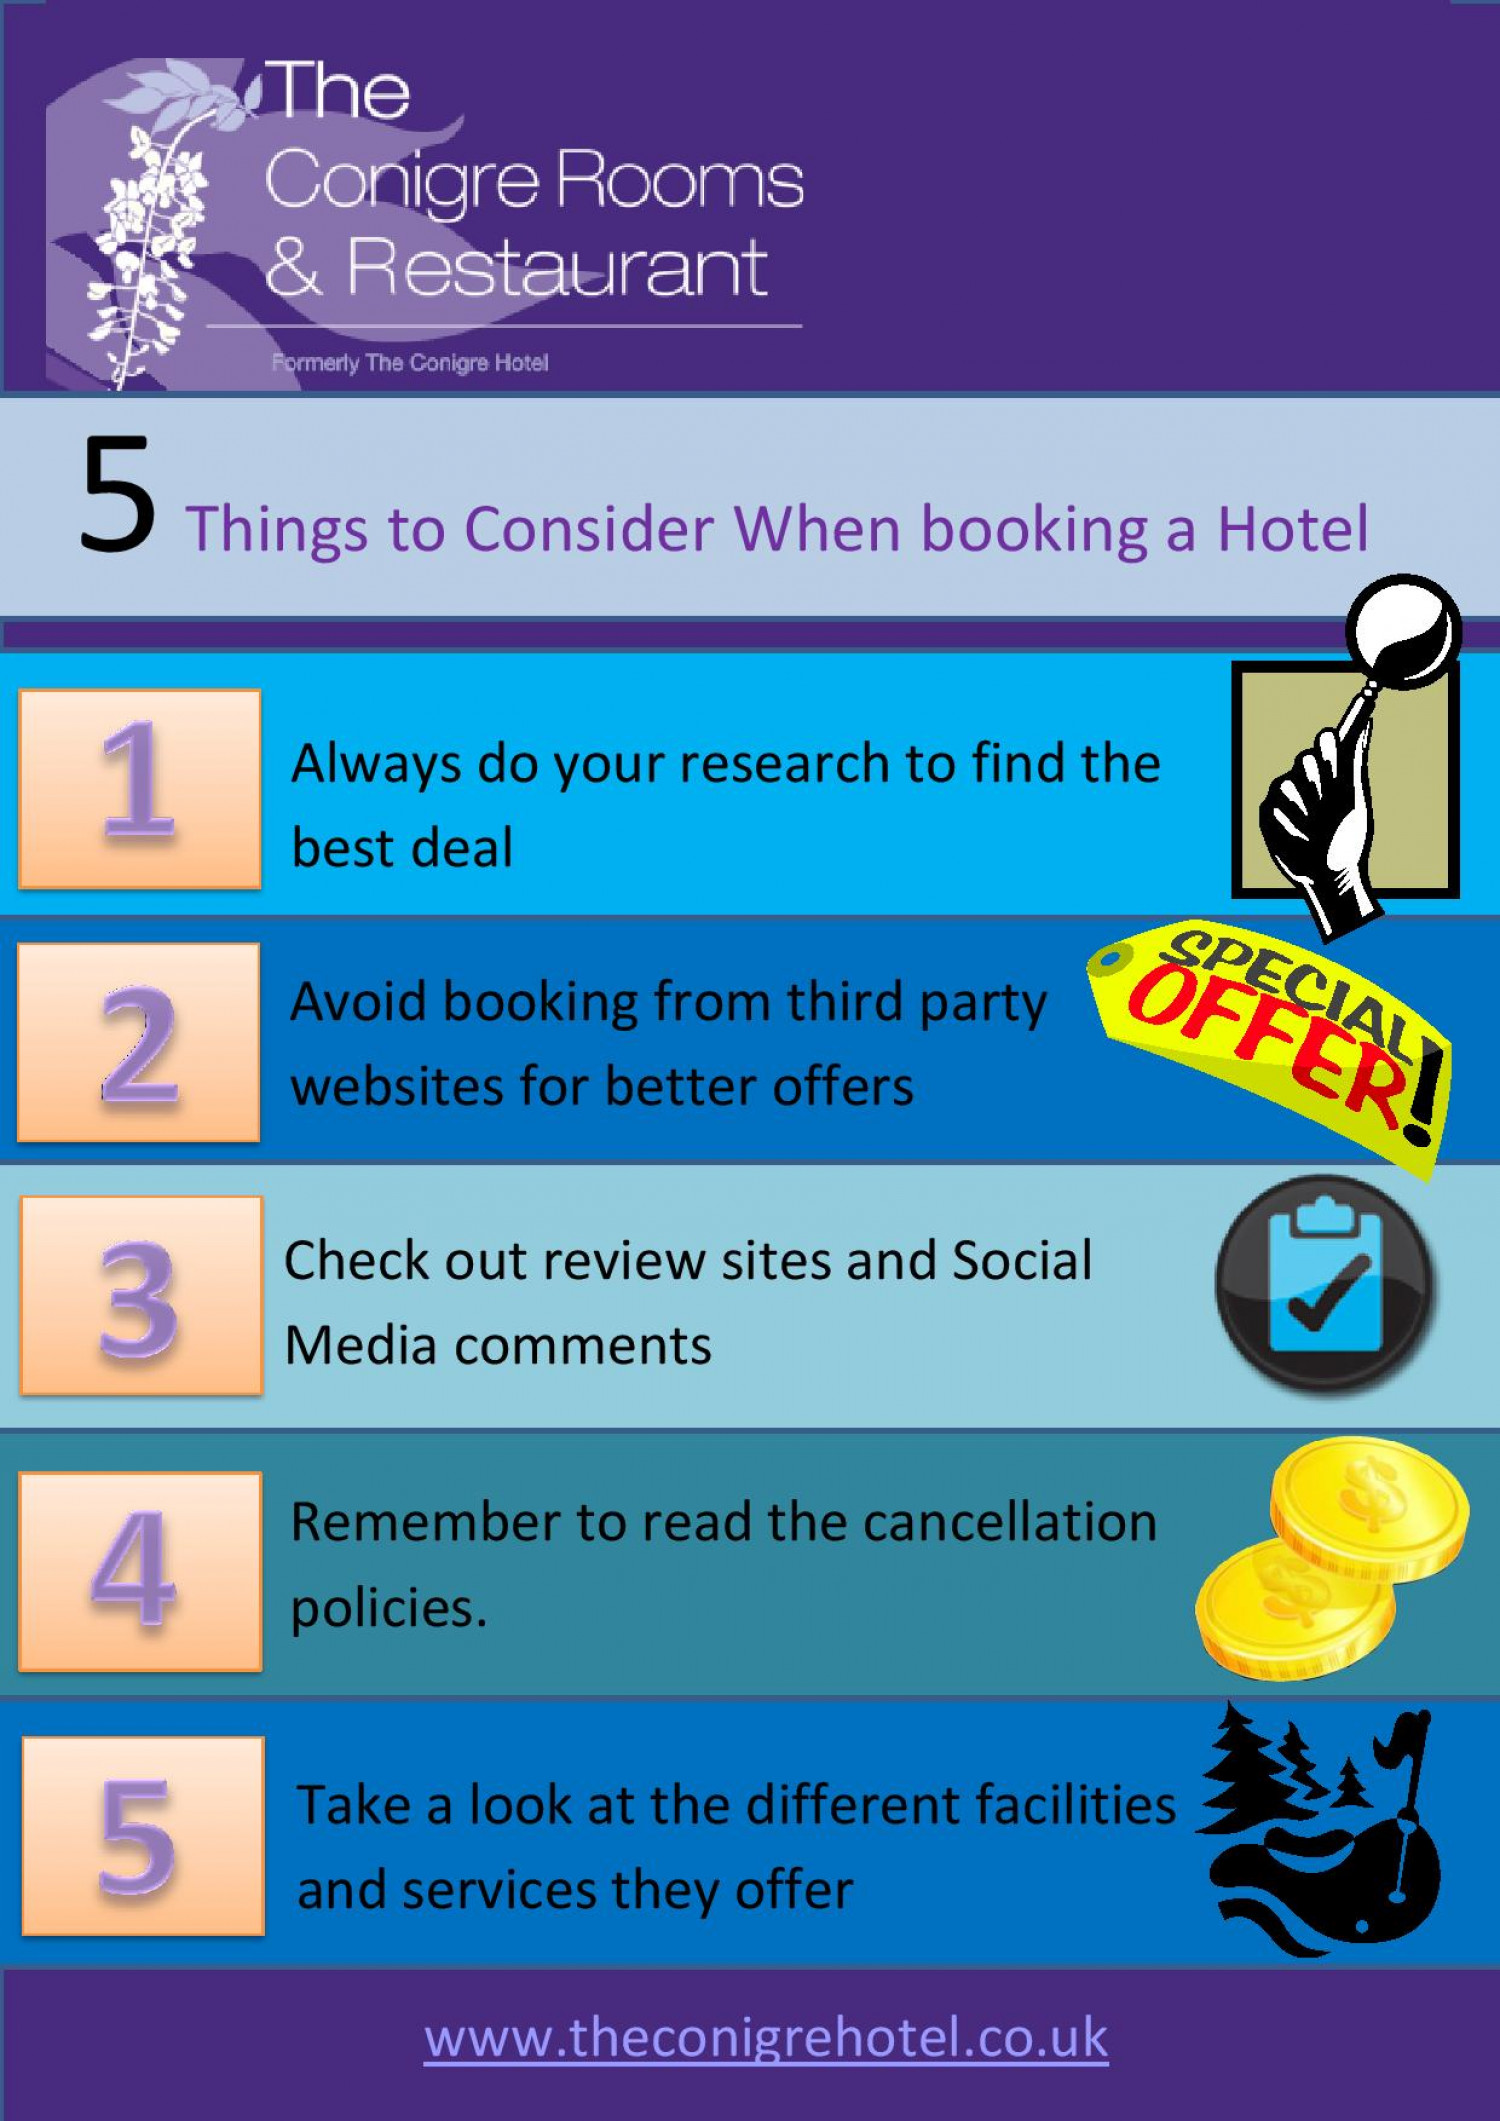 5 Things to consider when booking a hotel Infographic